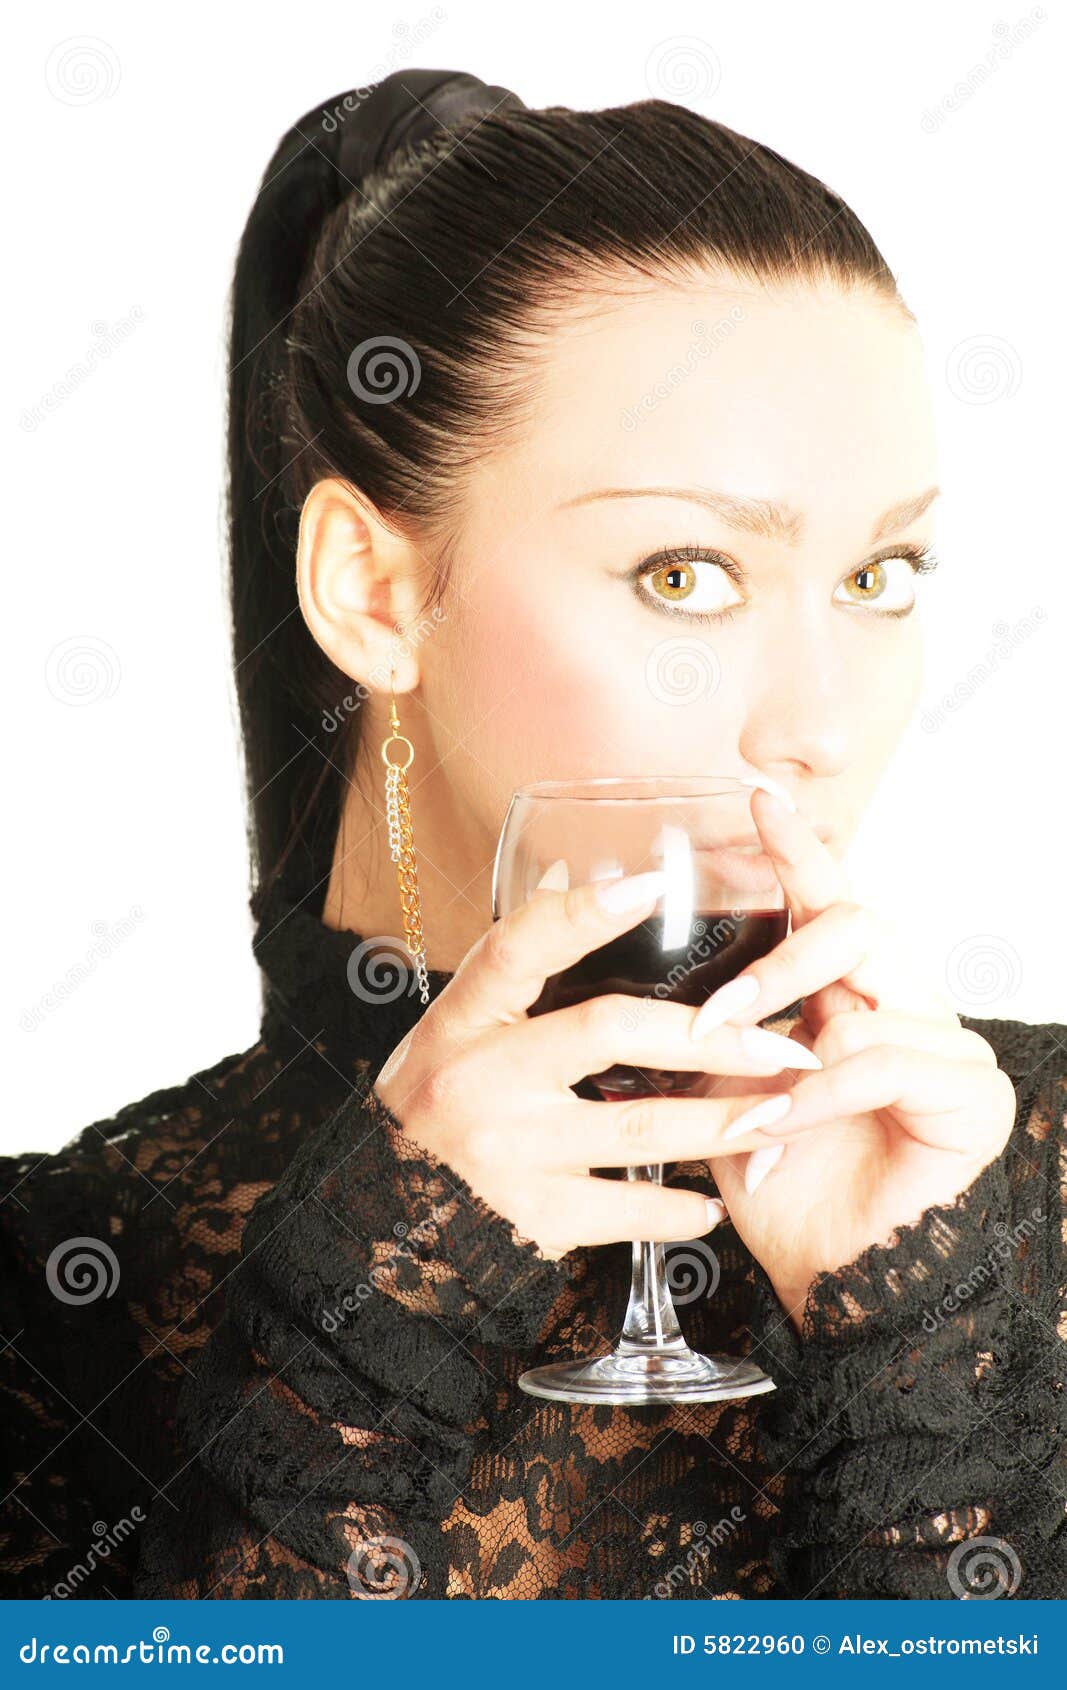 Lady With A Glass Of Red Wine Stock Photo - Image of cute, caucasian